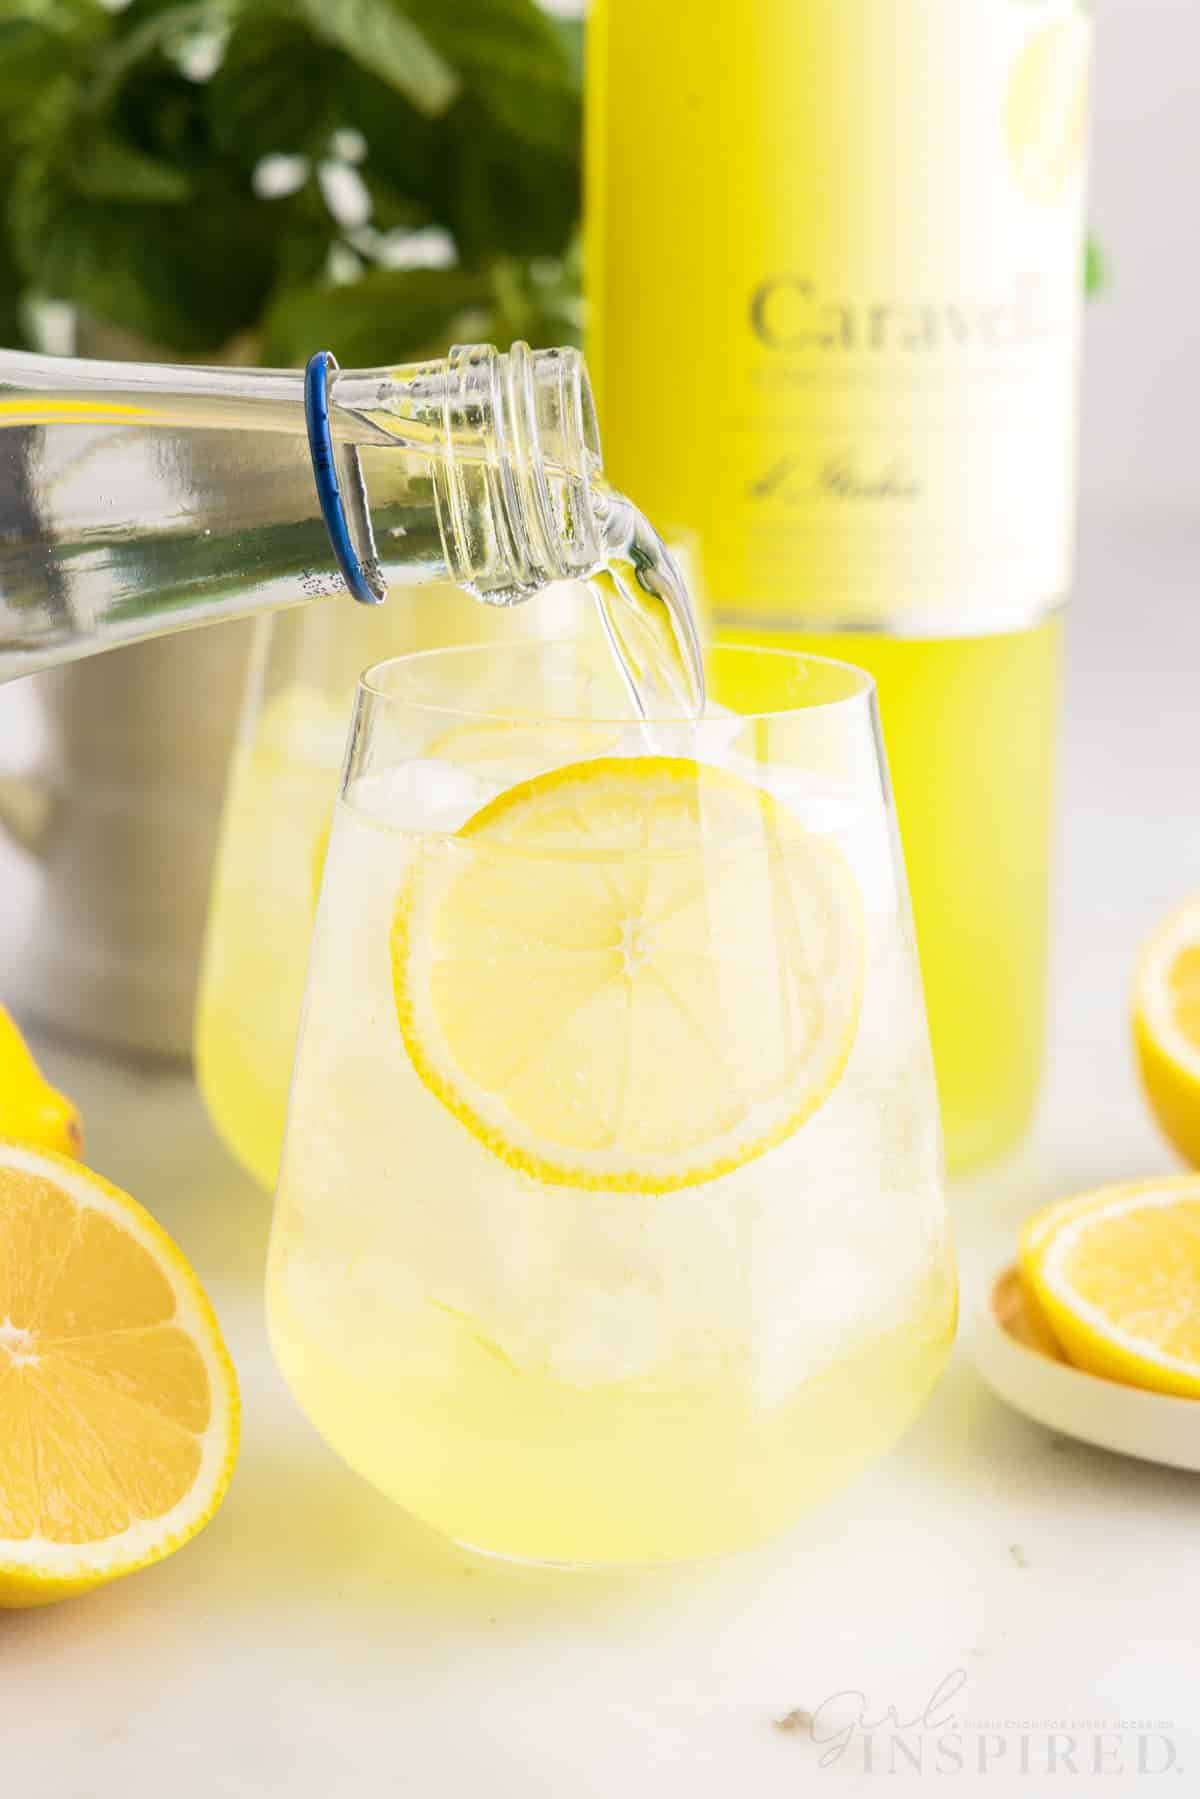 Club soda being added to glass with a bottle of Limoncello in the background.